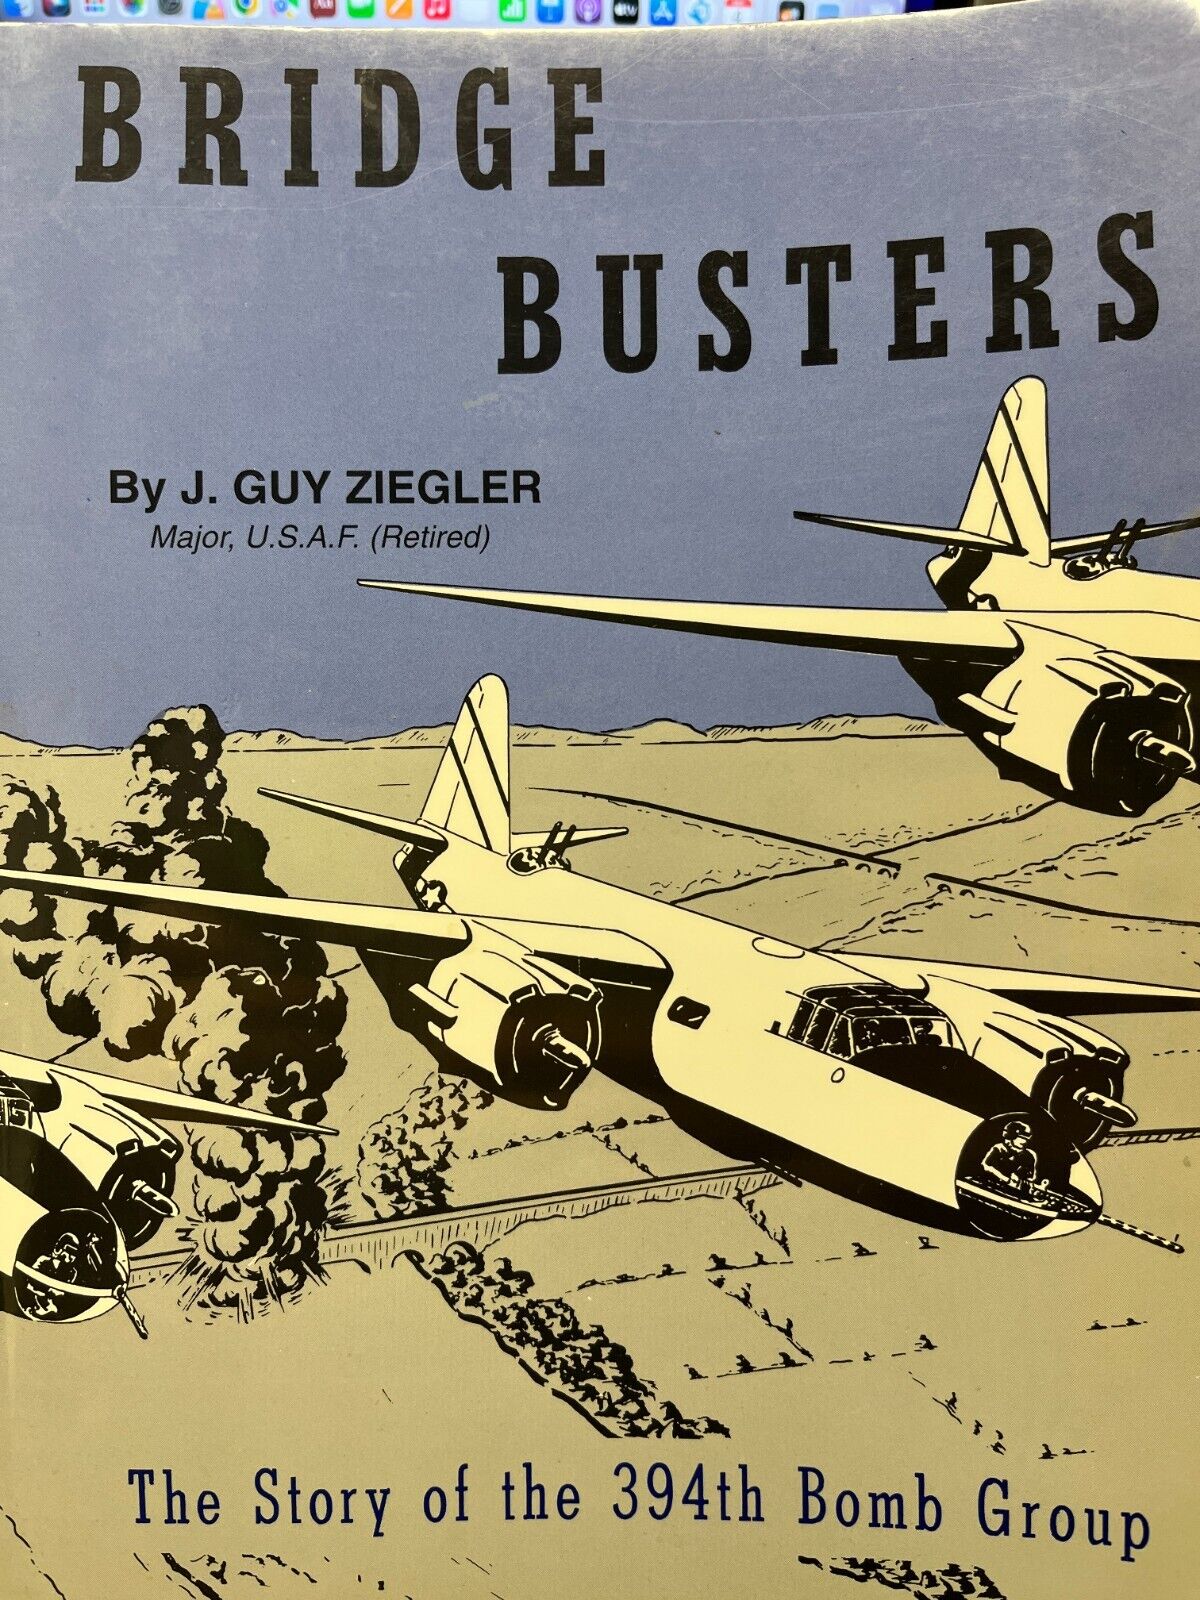 Bridge busters: The story of the 394th Bomb Group (pb 1999)